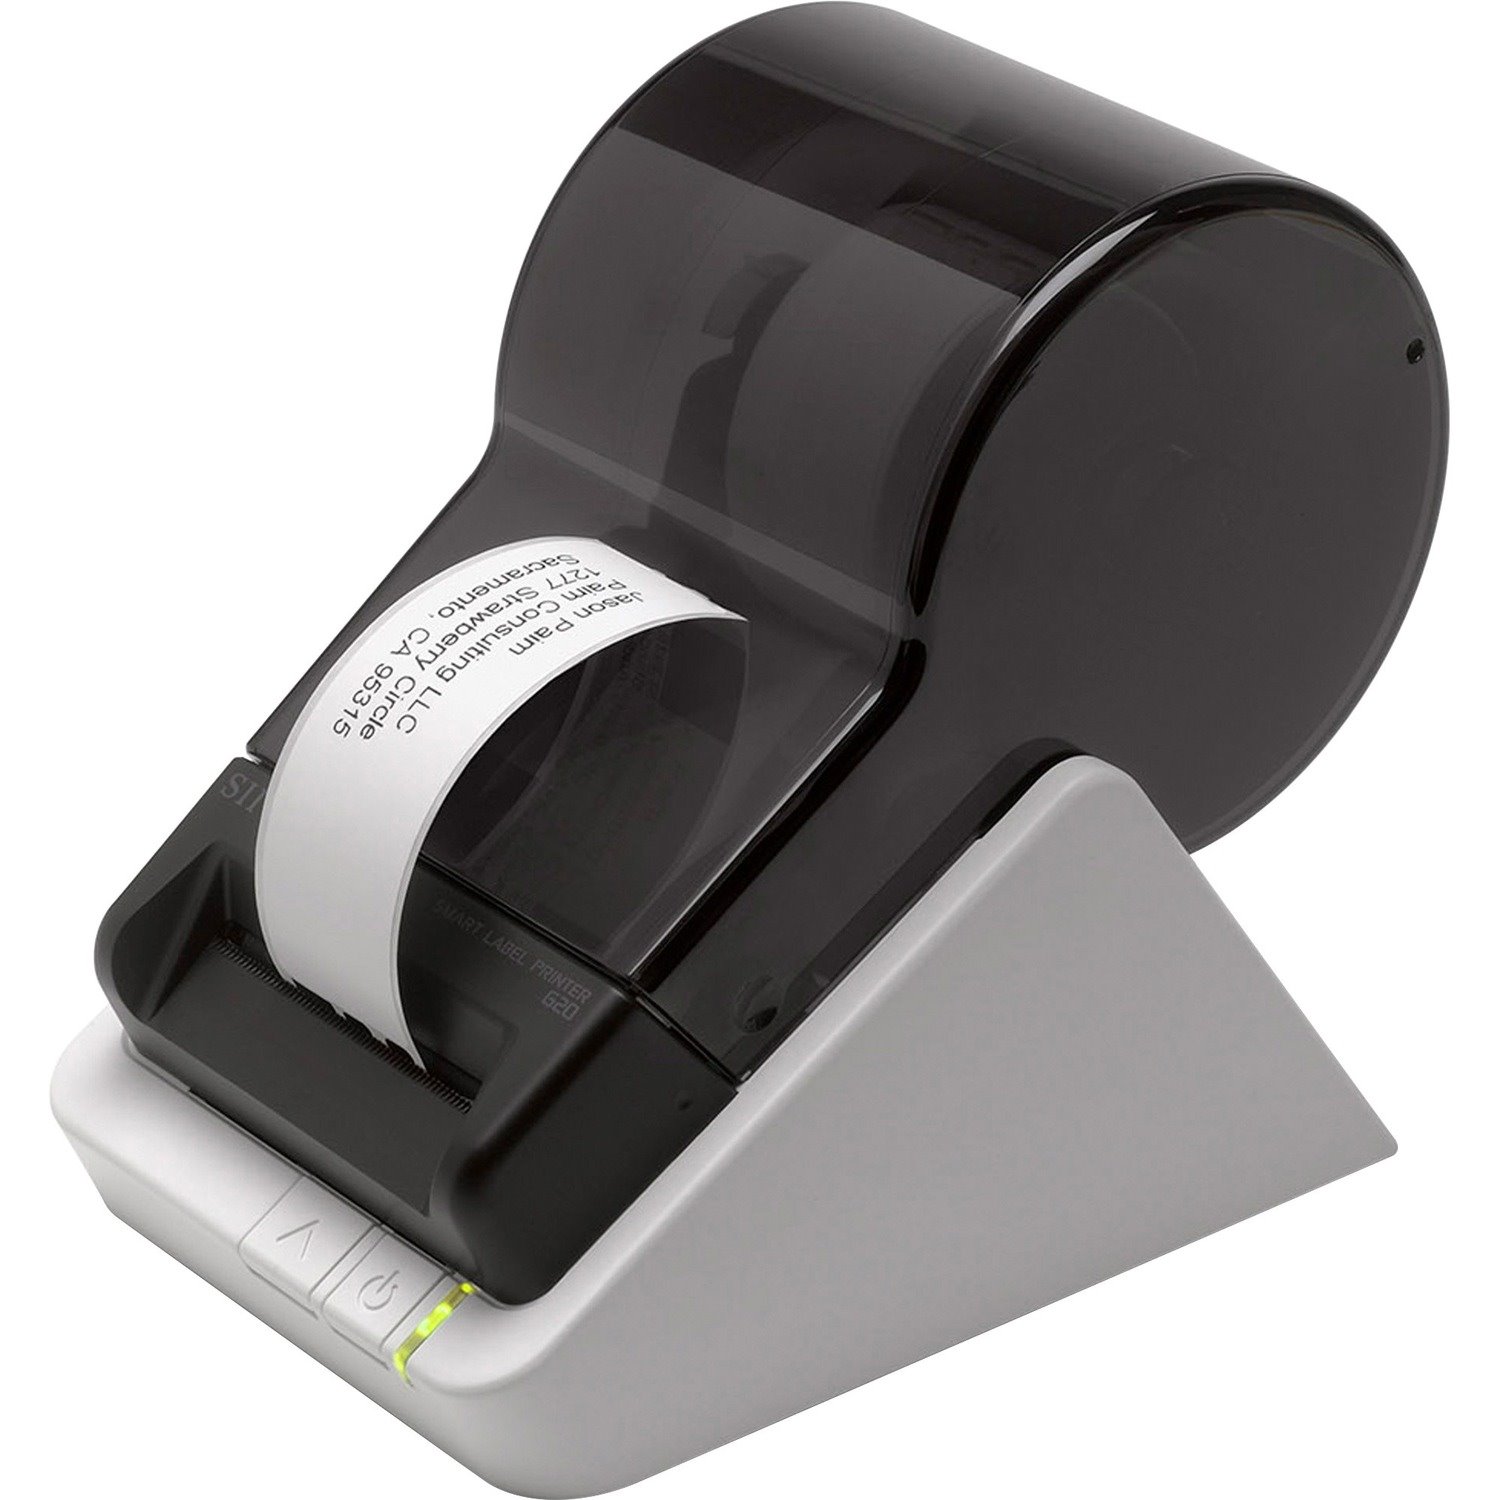 Seiko Versatile Desktop 2" Direct Thermal 203 dpi Smart Label Printer included with our Smart Label Software